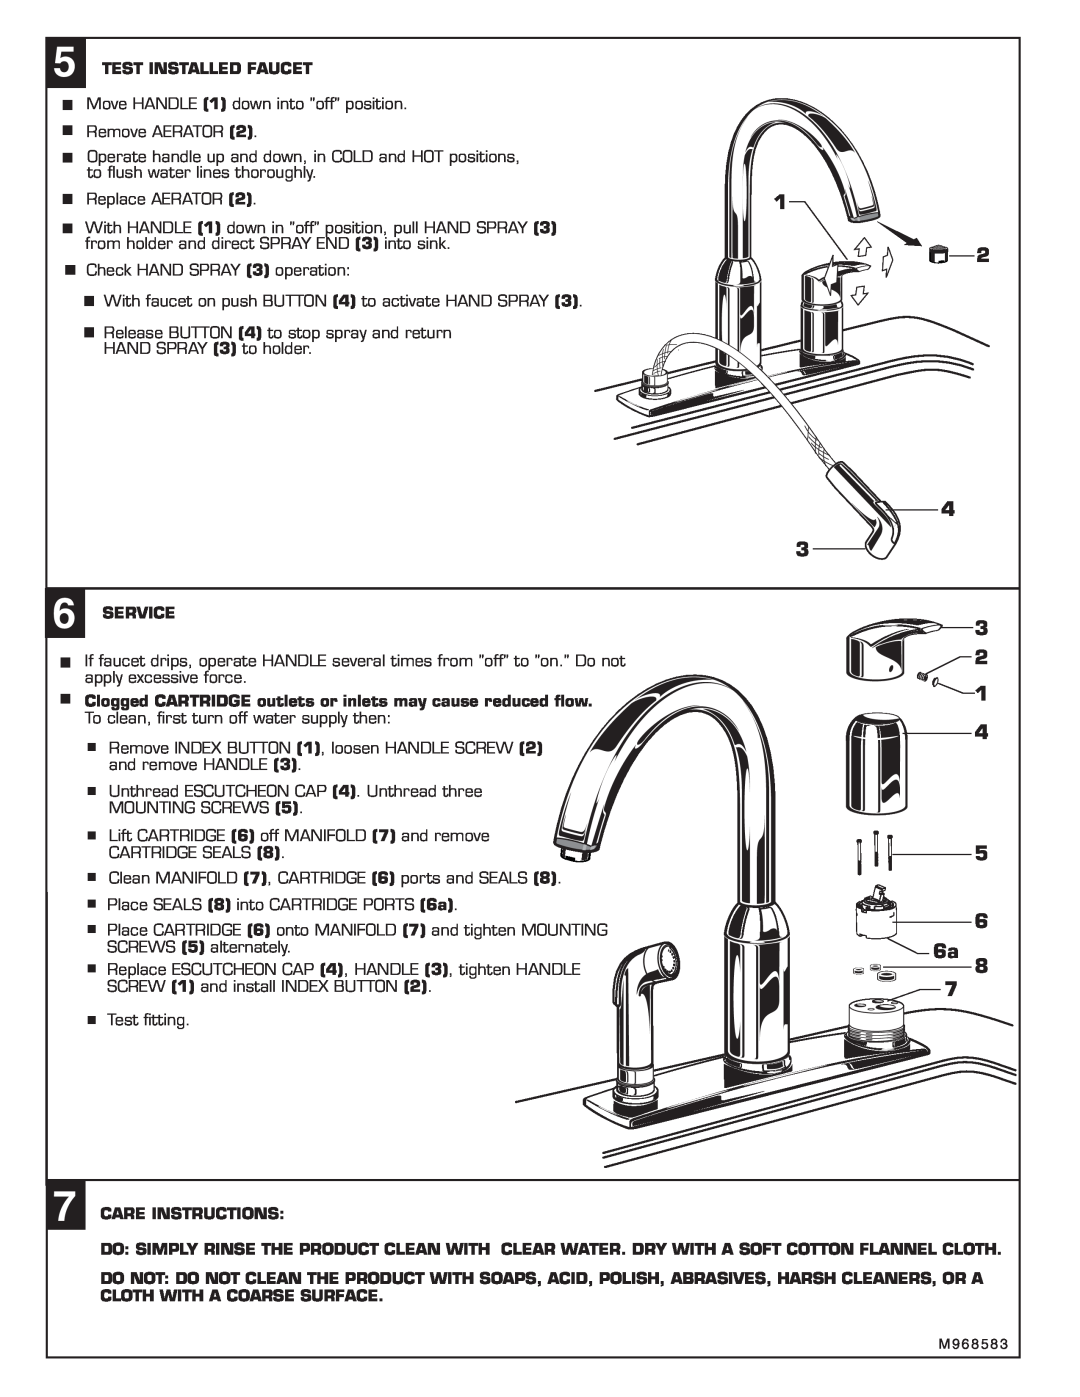 American Standard 4101.301 installation instructions Test Installed Faucet, Service, Care Instructions 